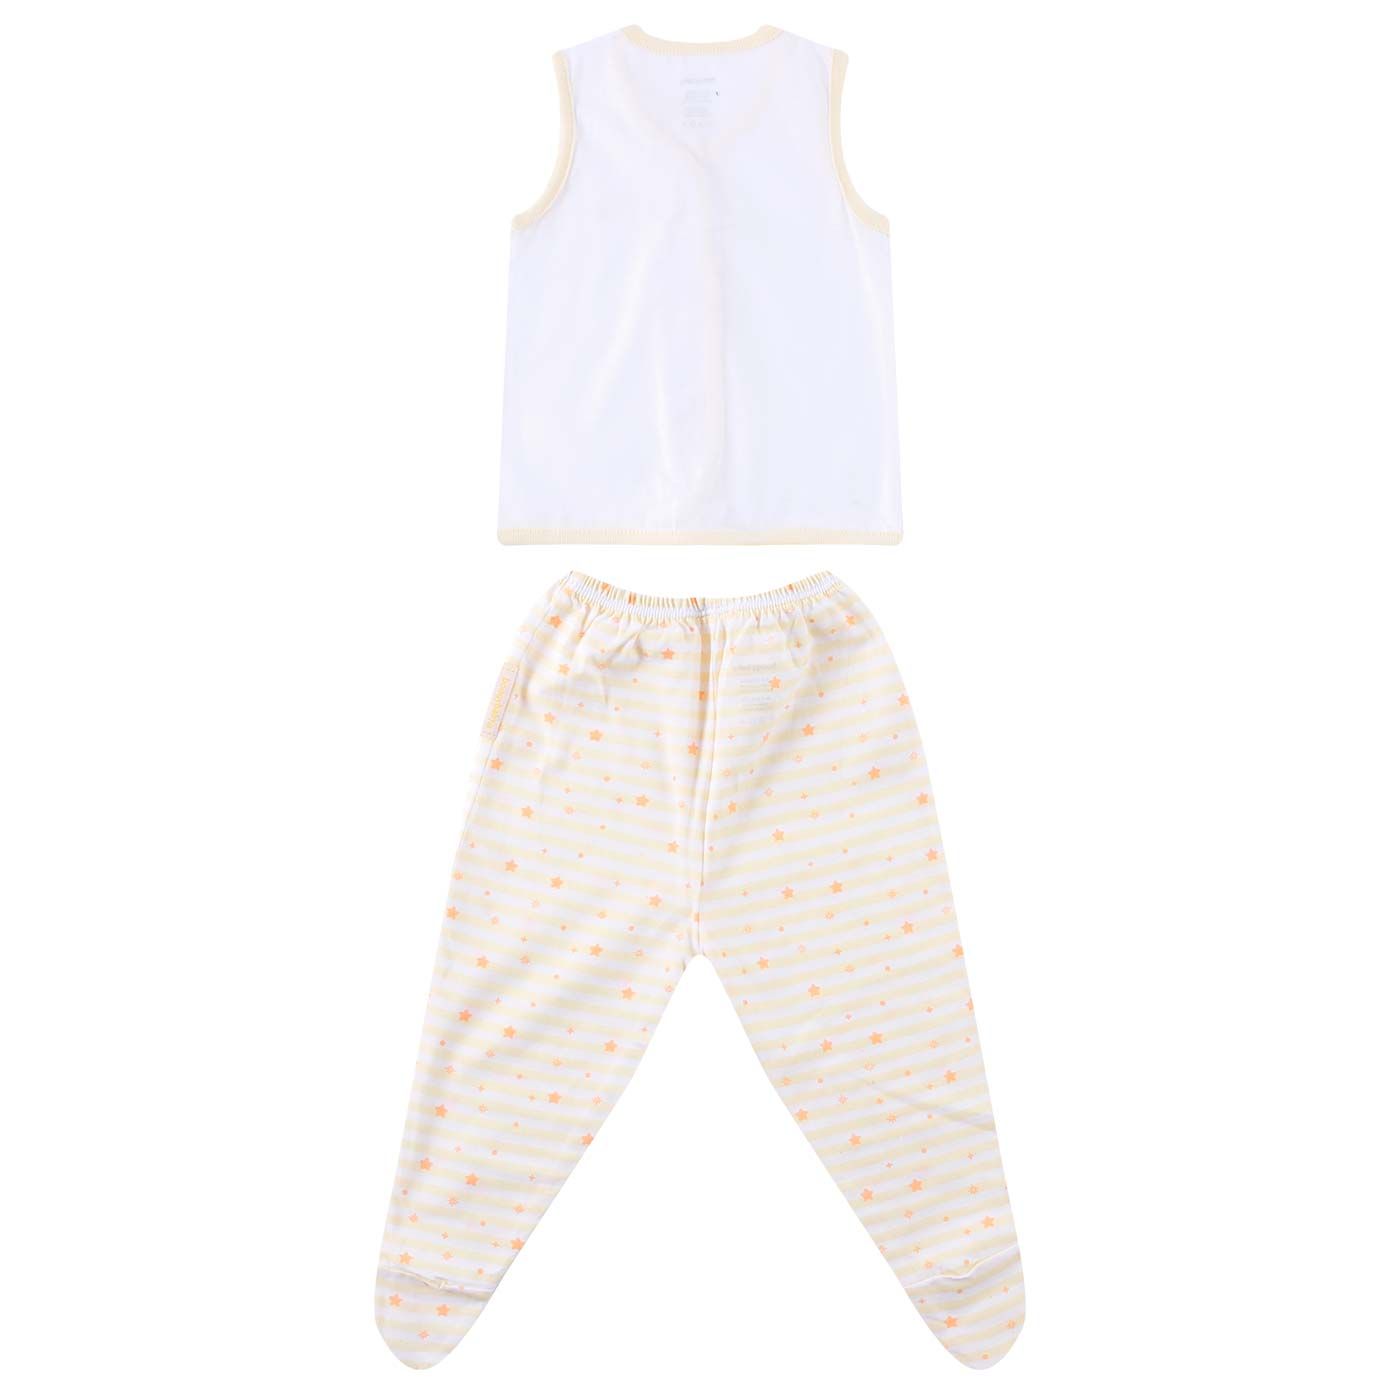 Boogybaby Sleeveless&Closed Trousers Girl-NB Stadust (Isi 3) - 3